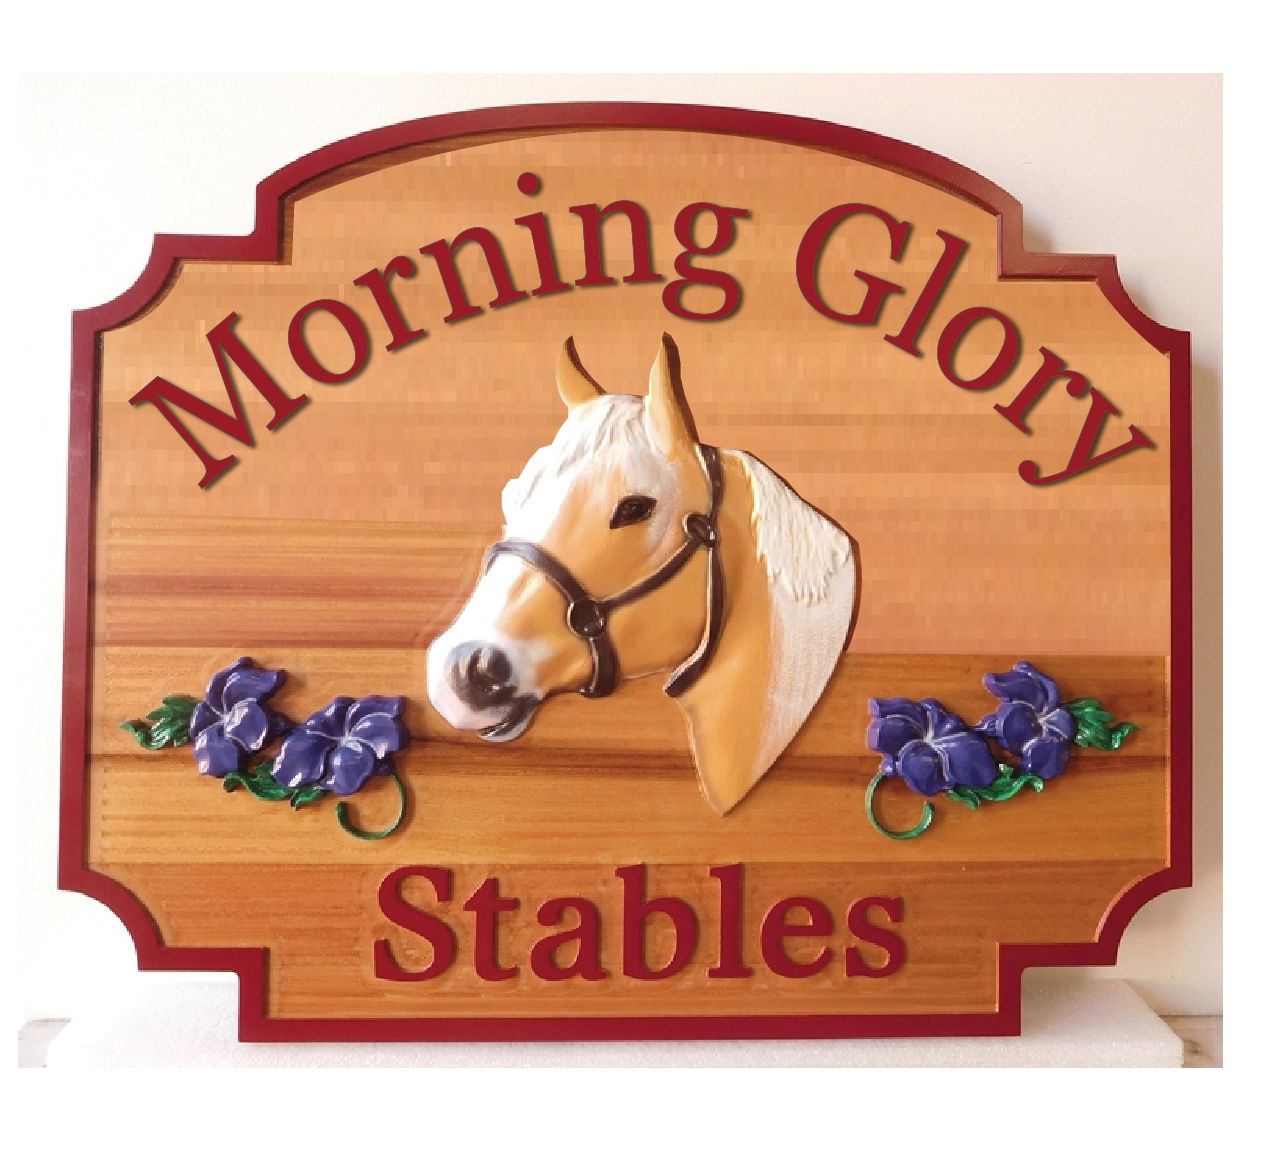 P25050 - Carved Cedar Wood Sign for Horse Stable